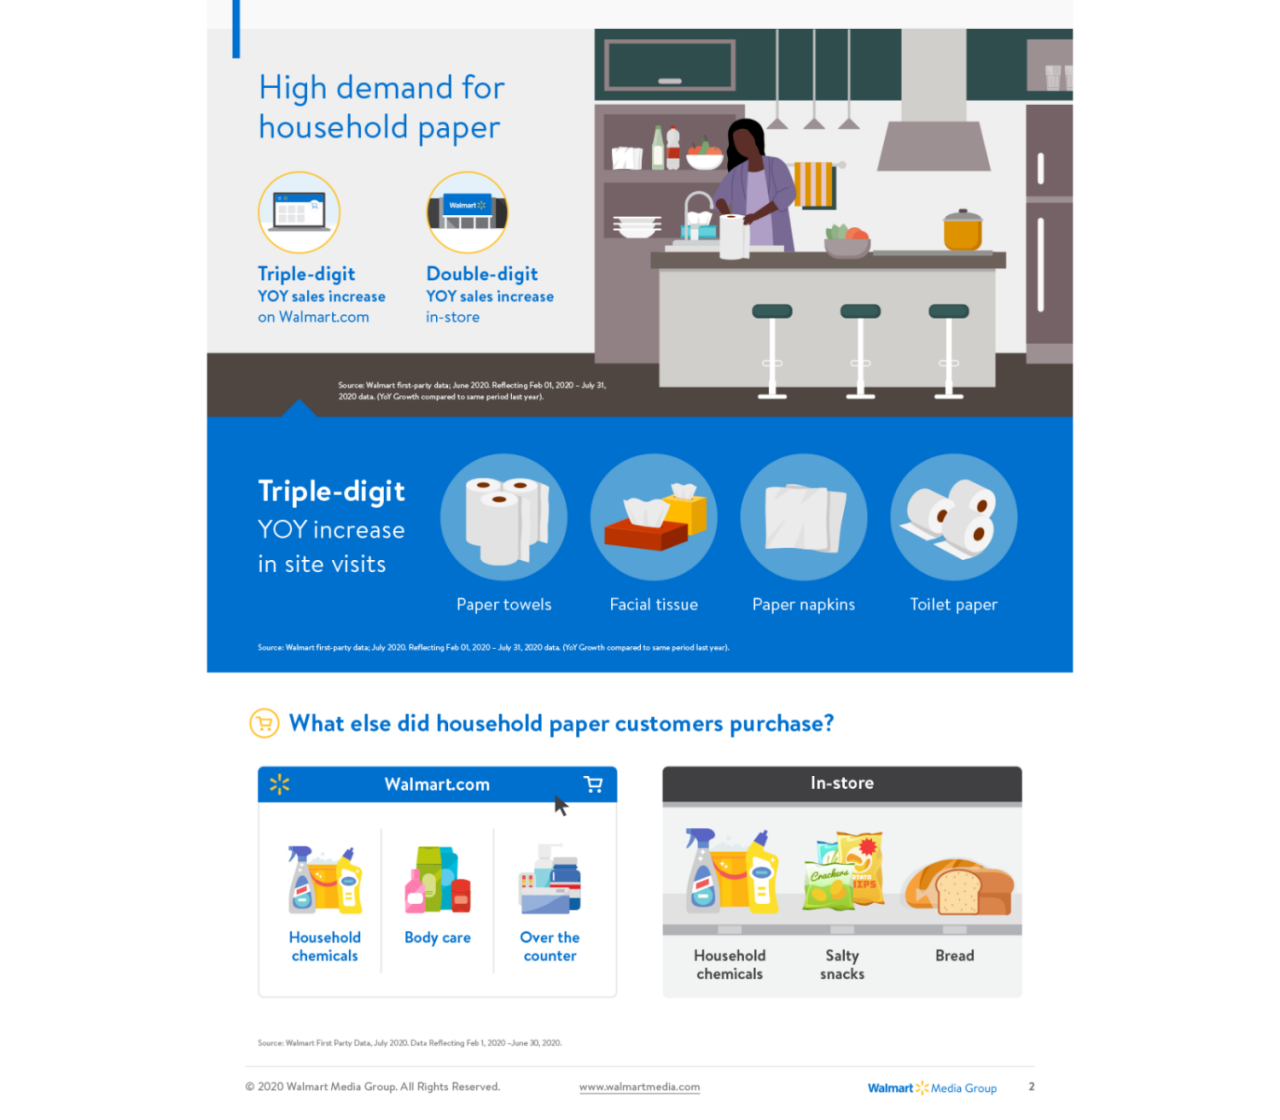 walmart-customer-insights-household-essentials-personal-care-2